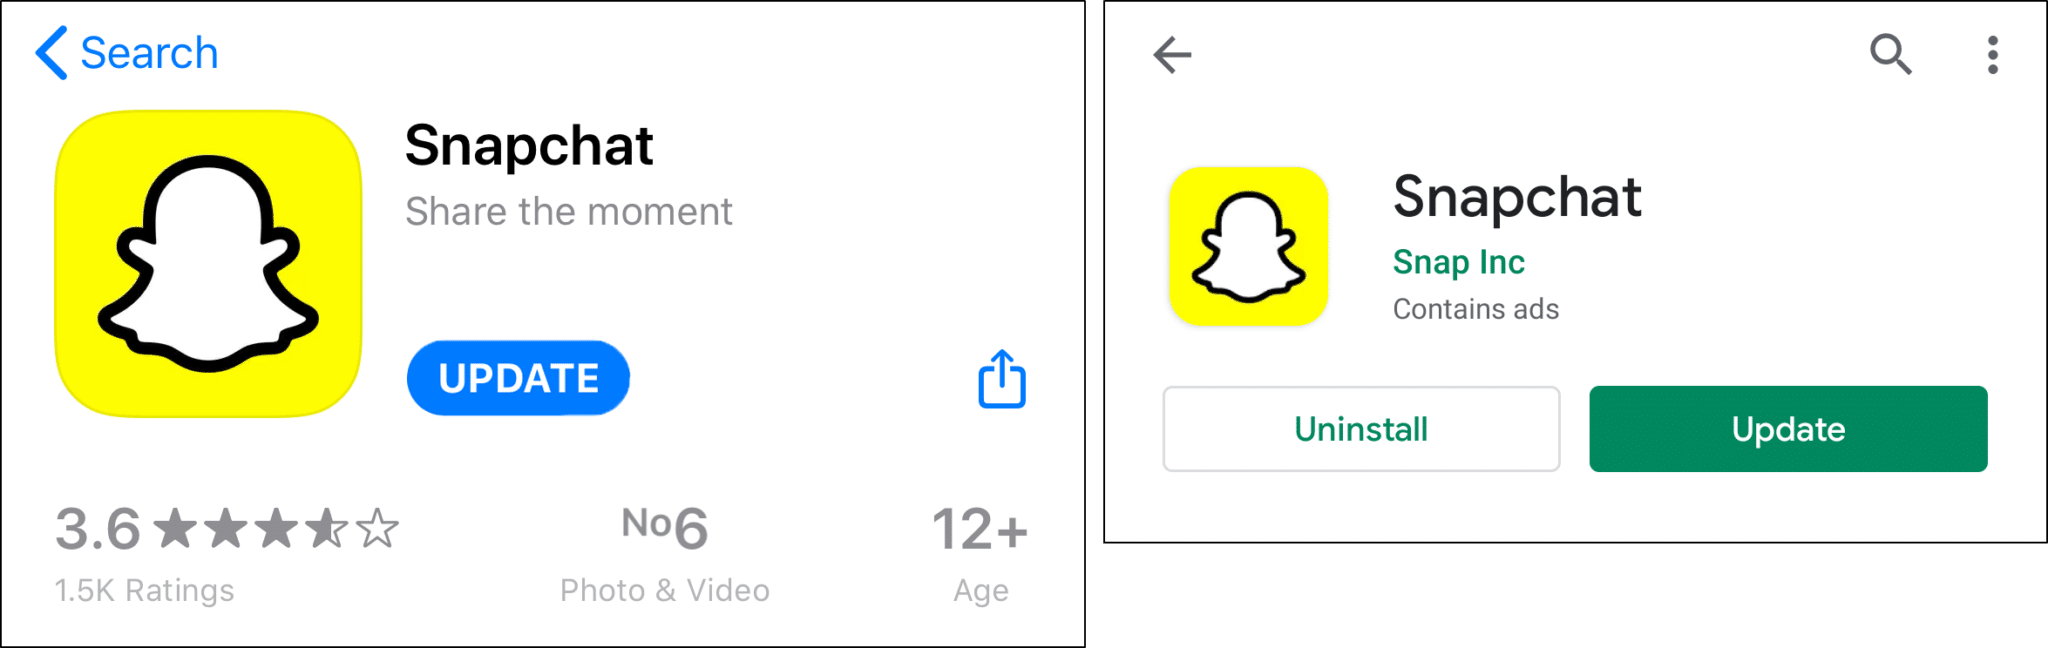 update the Snapchat app on iPhone or Android